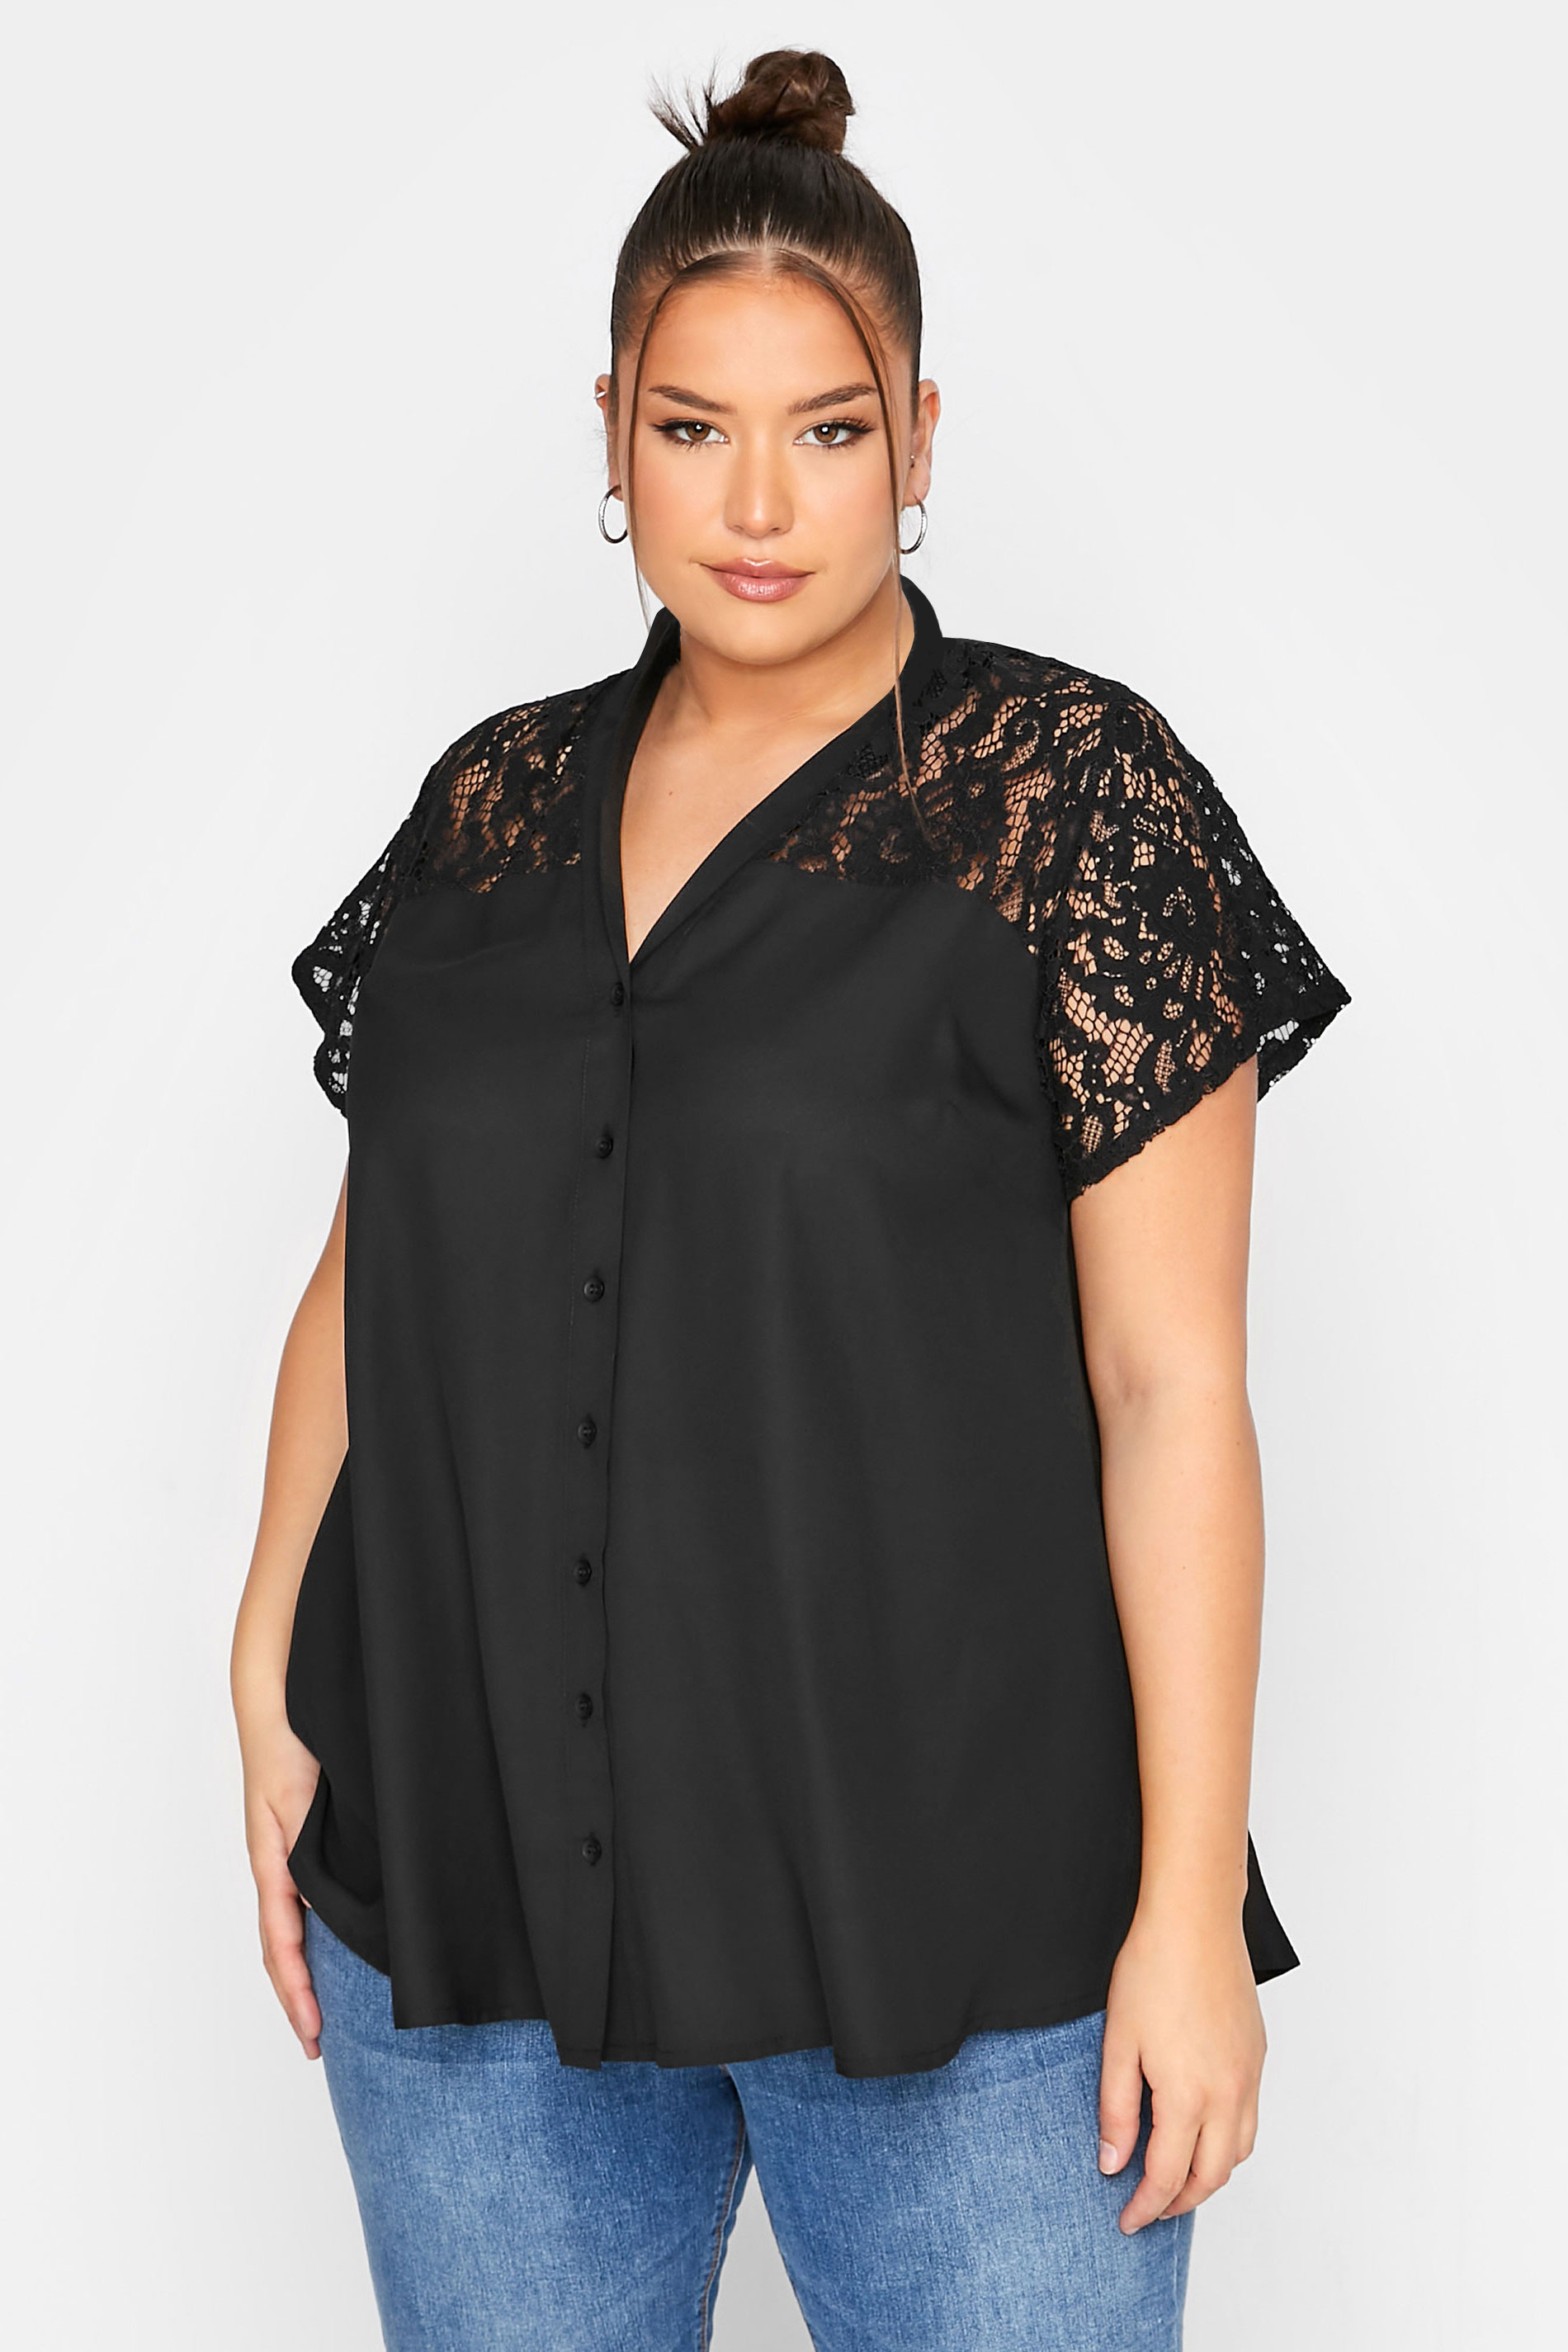 LIMITED COLLECTION Plus Size Black Lace Insert Blouse | Yours Clothing 1